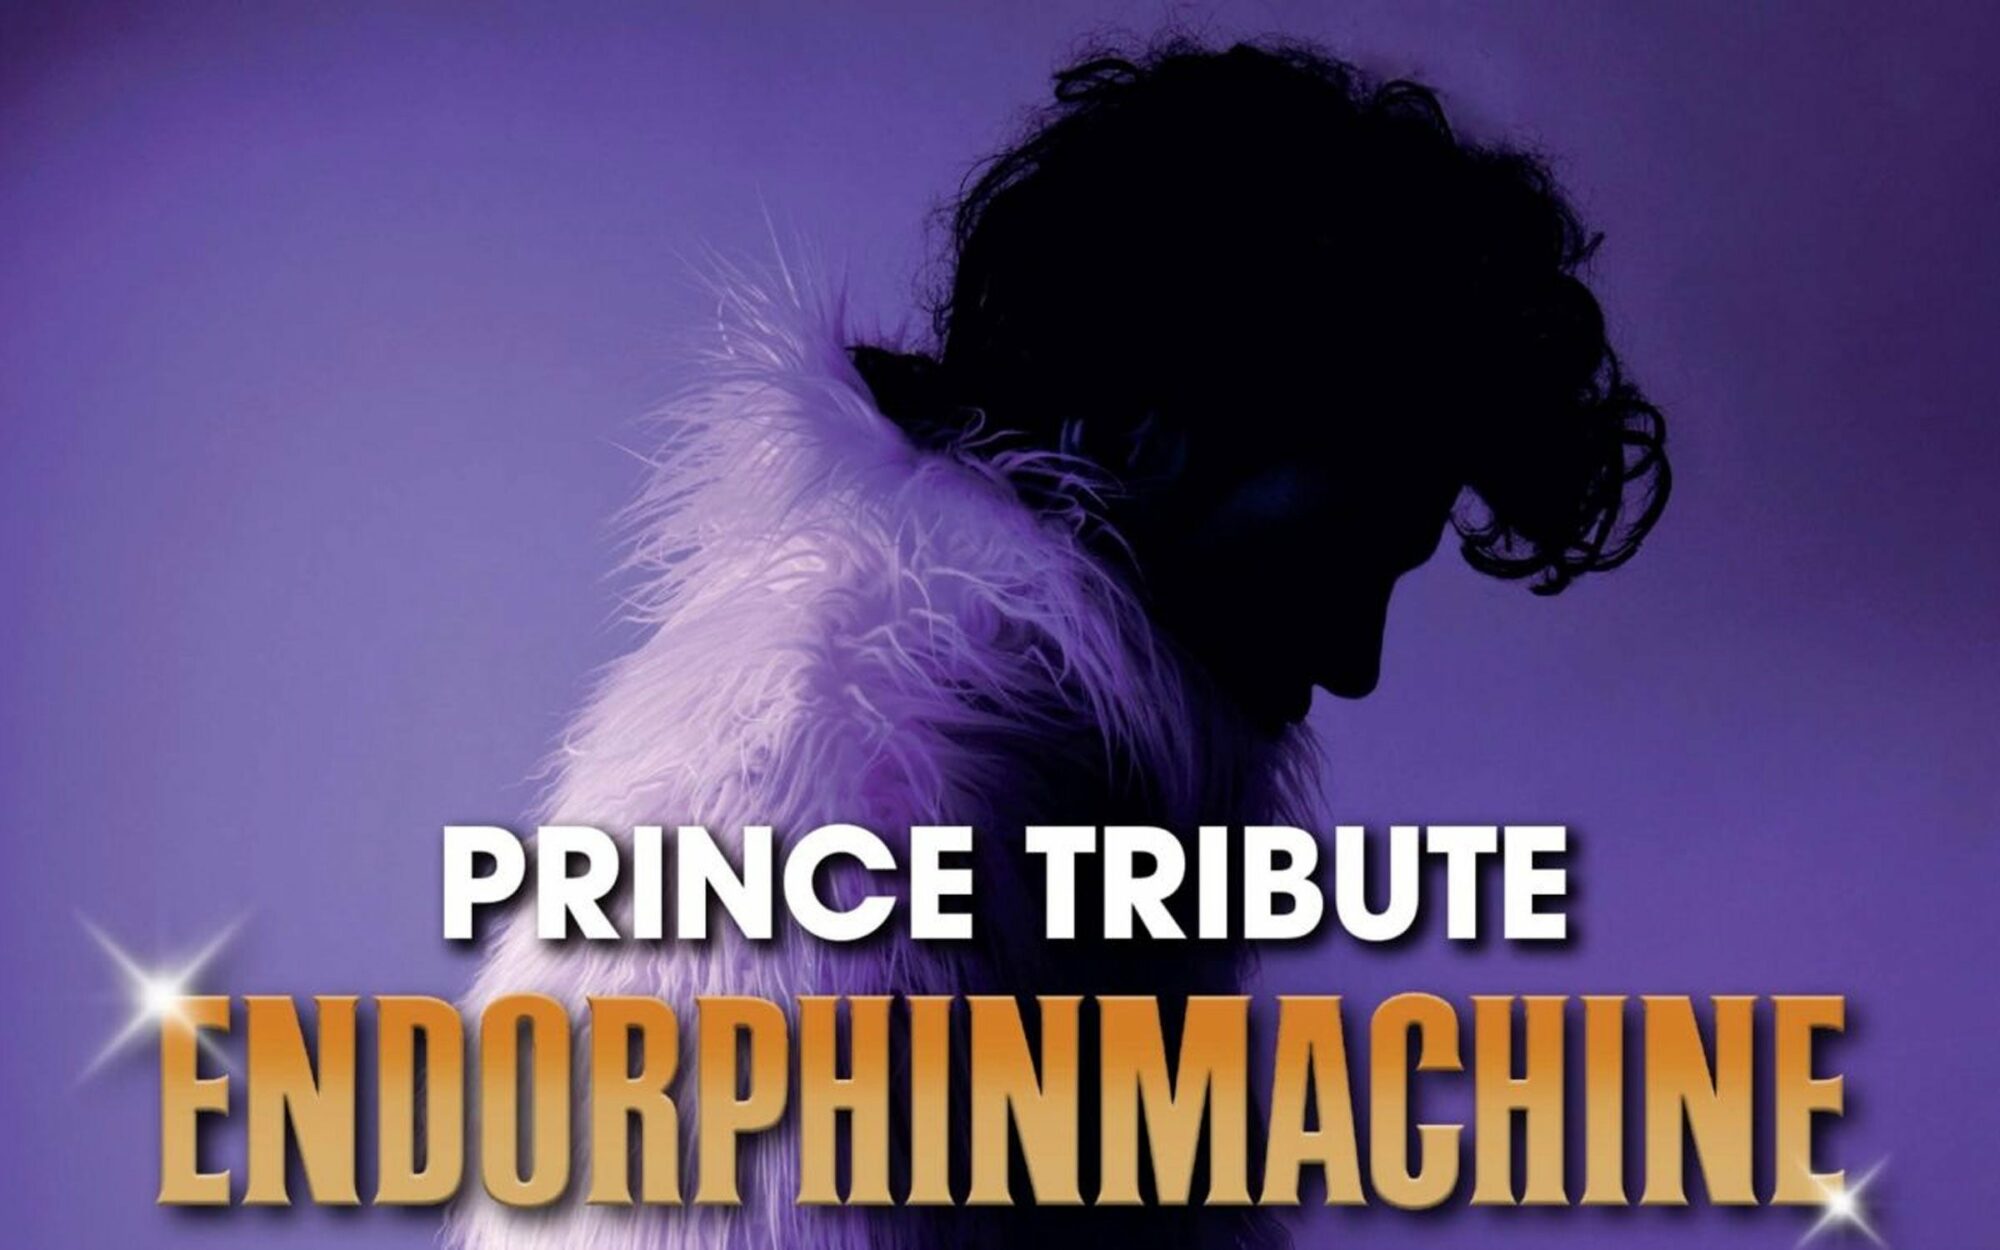 Image name Prince Tribute Endorphinmachine at O2 Academy2 Sheffield Sheffield the 11 image from the post Prince Tribute... Endorphinmachine at O2 Academy2 Sheffield, Sheffield in Yorkshire.com.